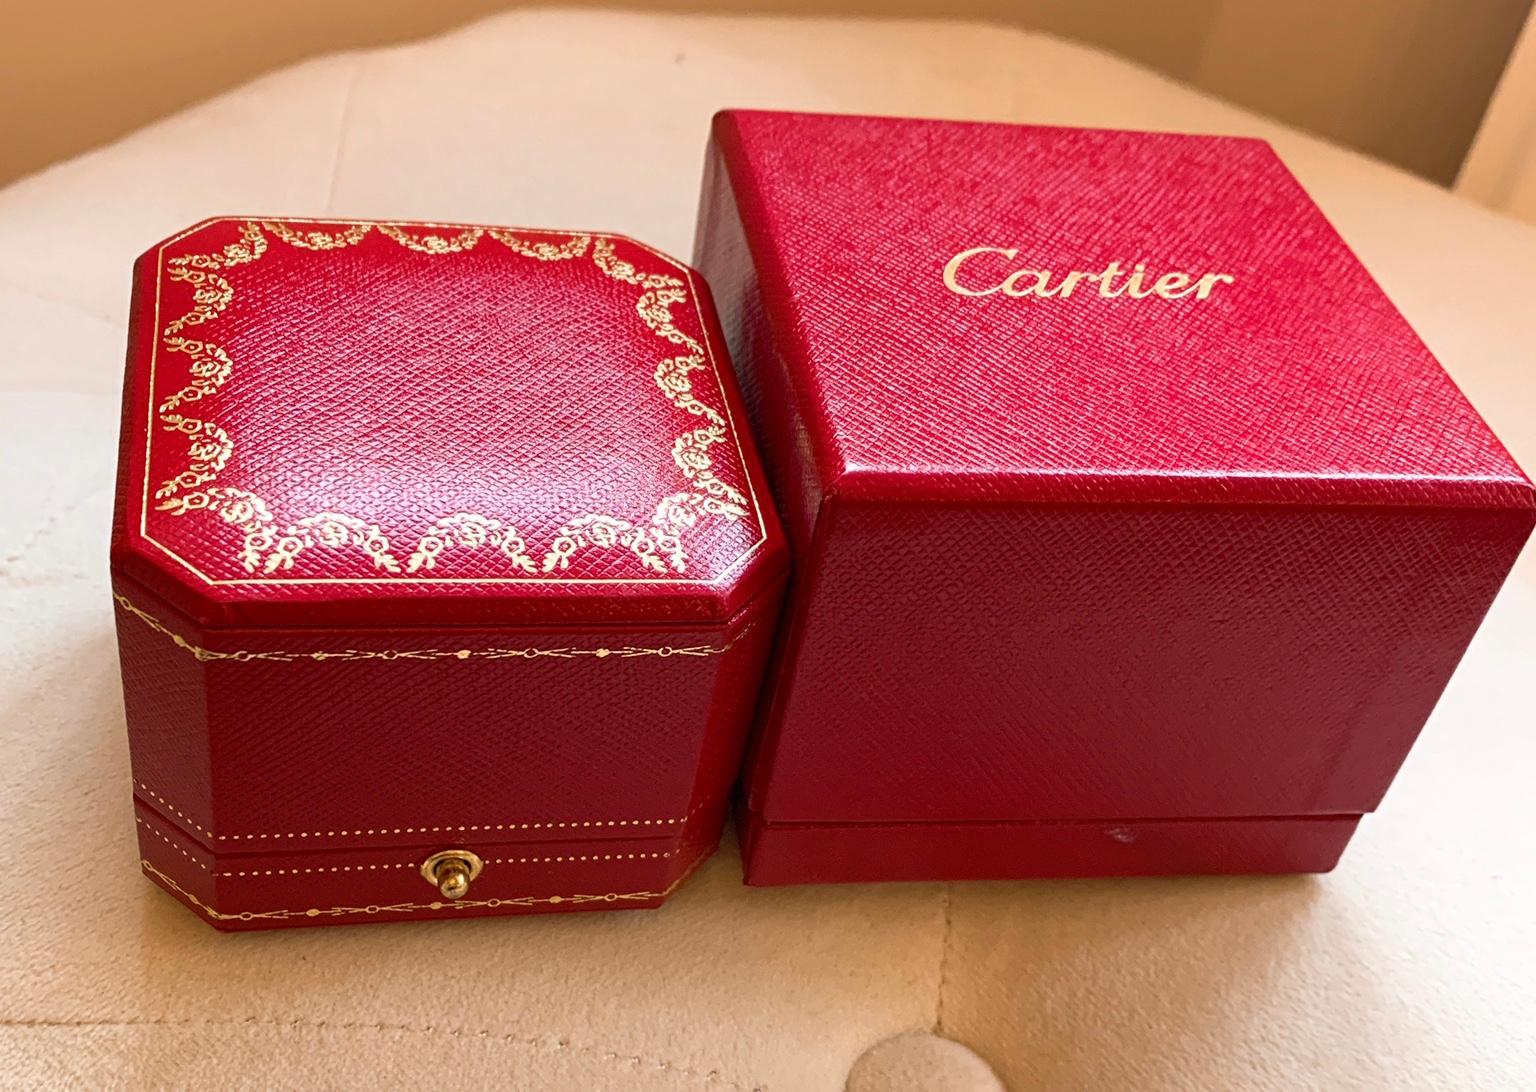 Original Cartier ring box in NW10 